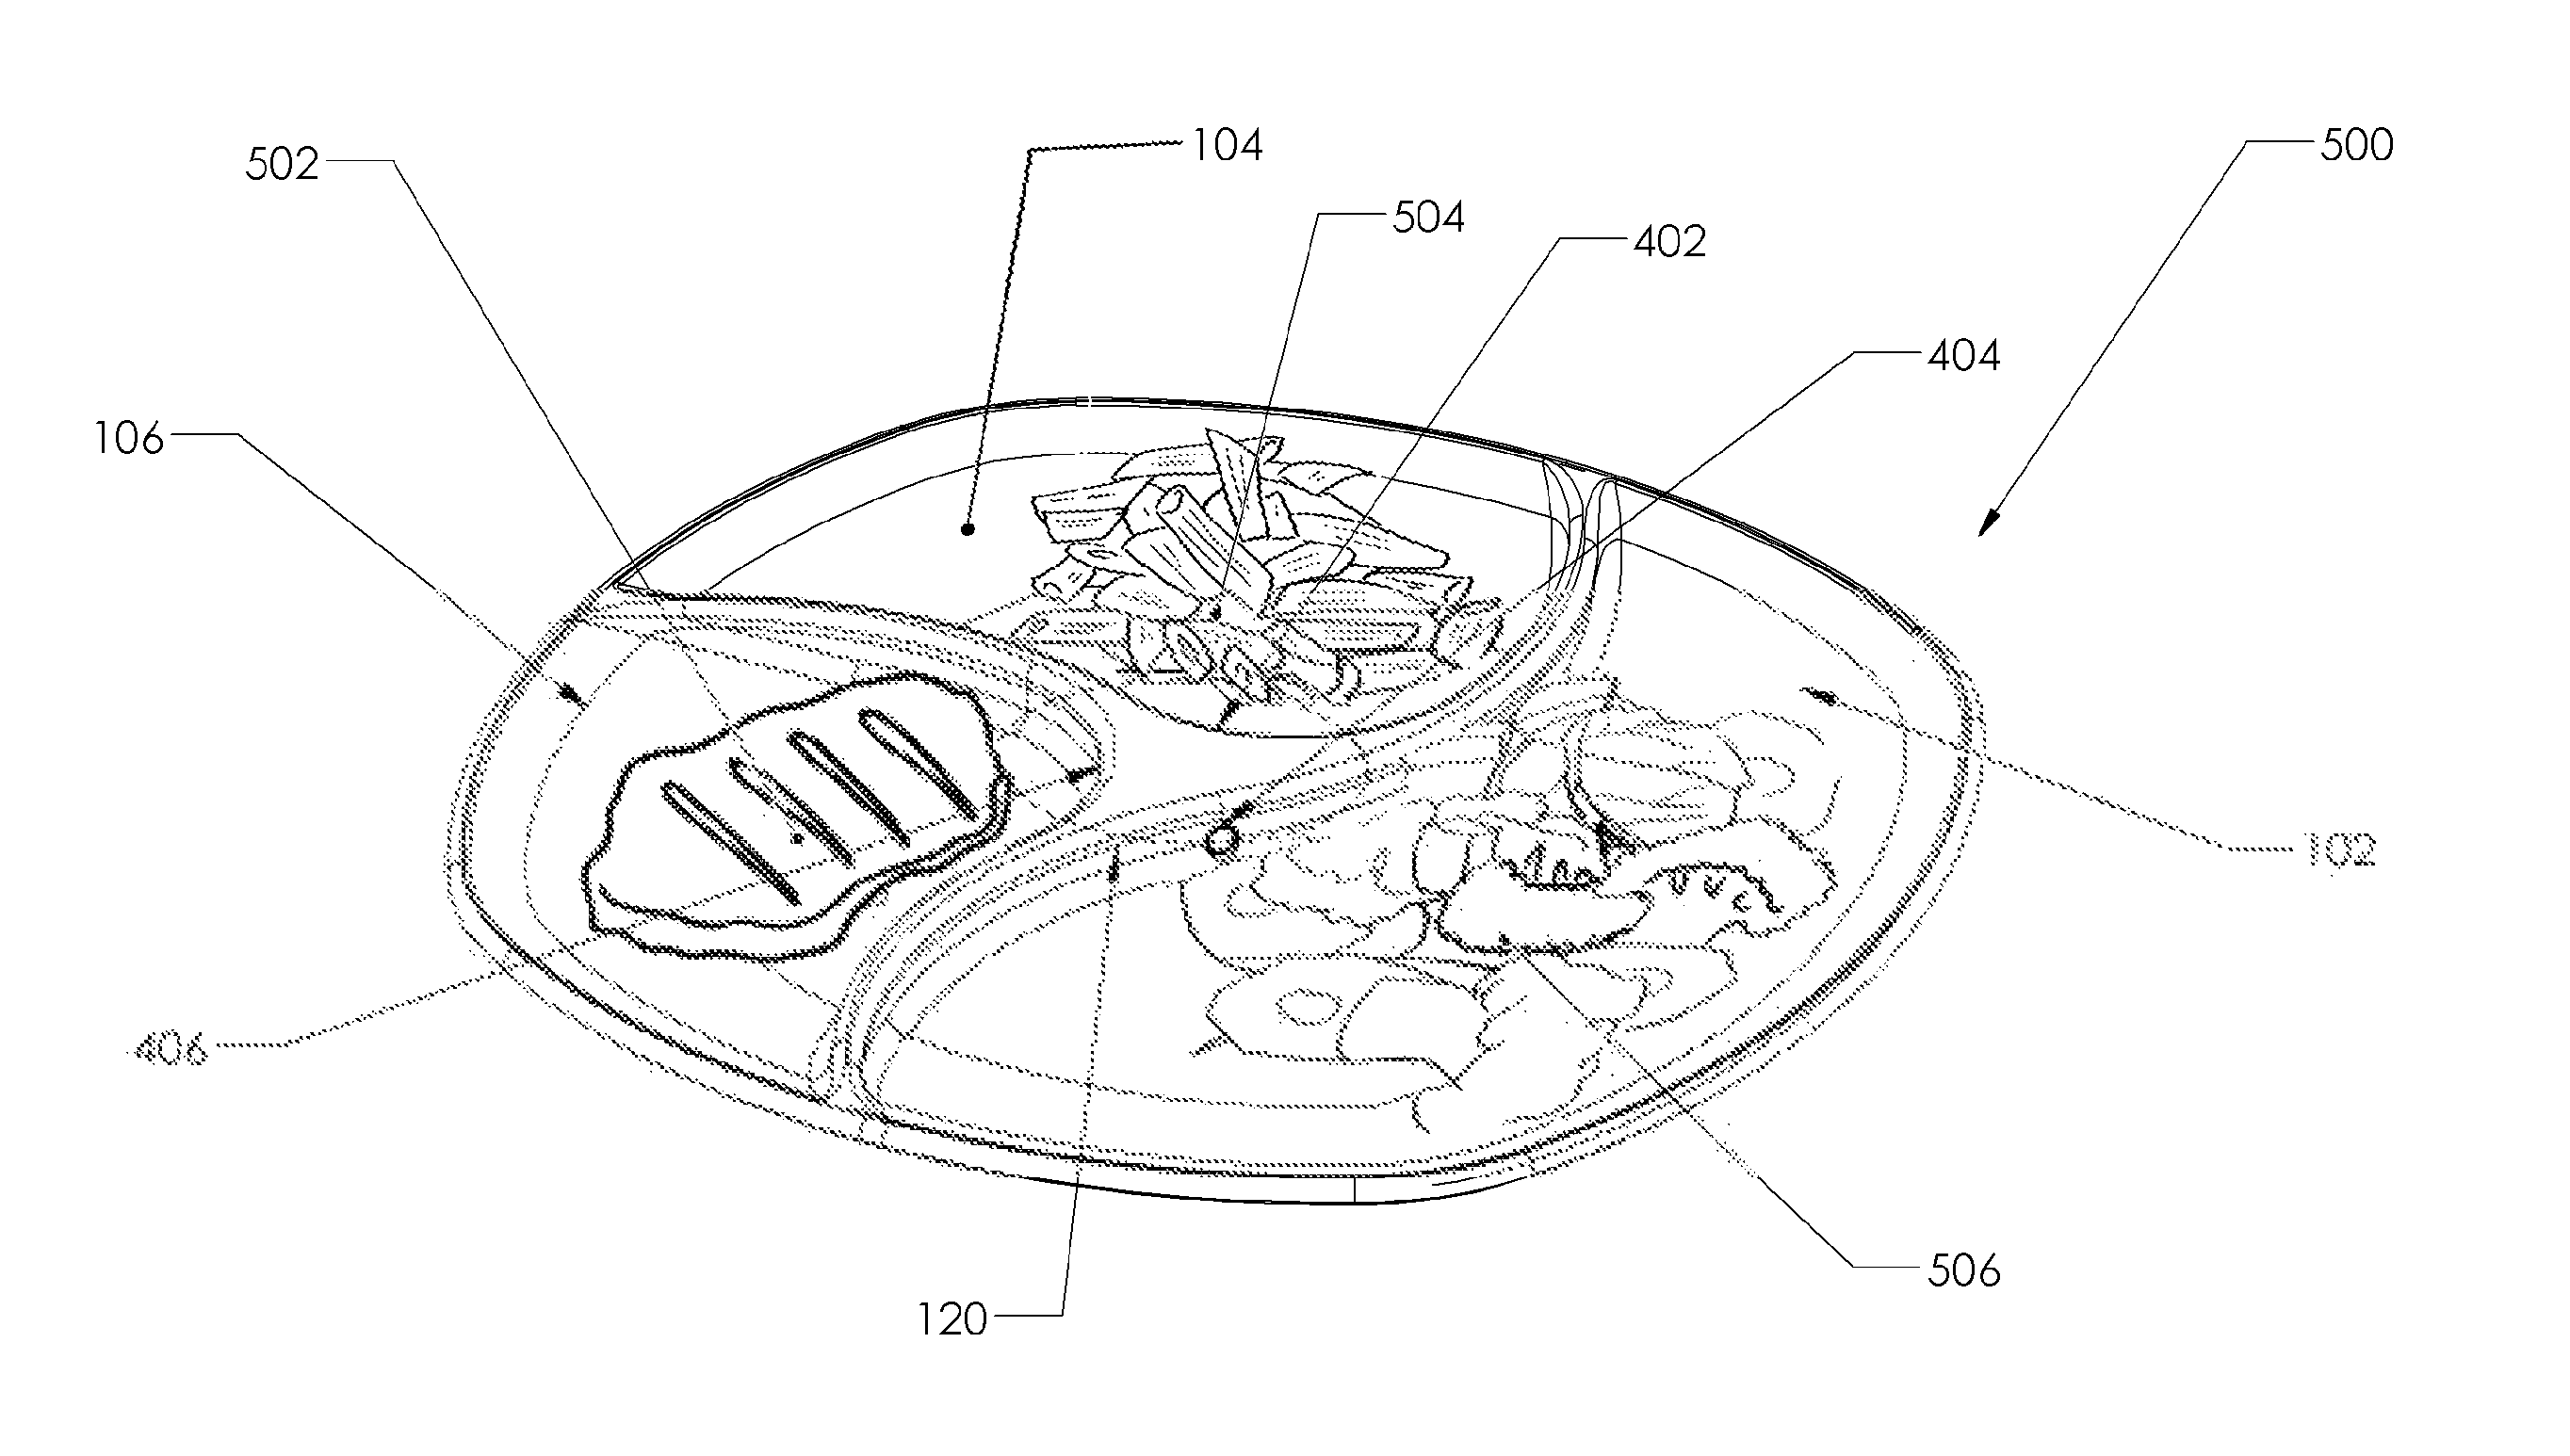 Apparatus and method for identifying, measuring and analyzing food nutritional values and consumer eating behaviors